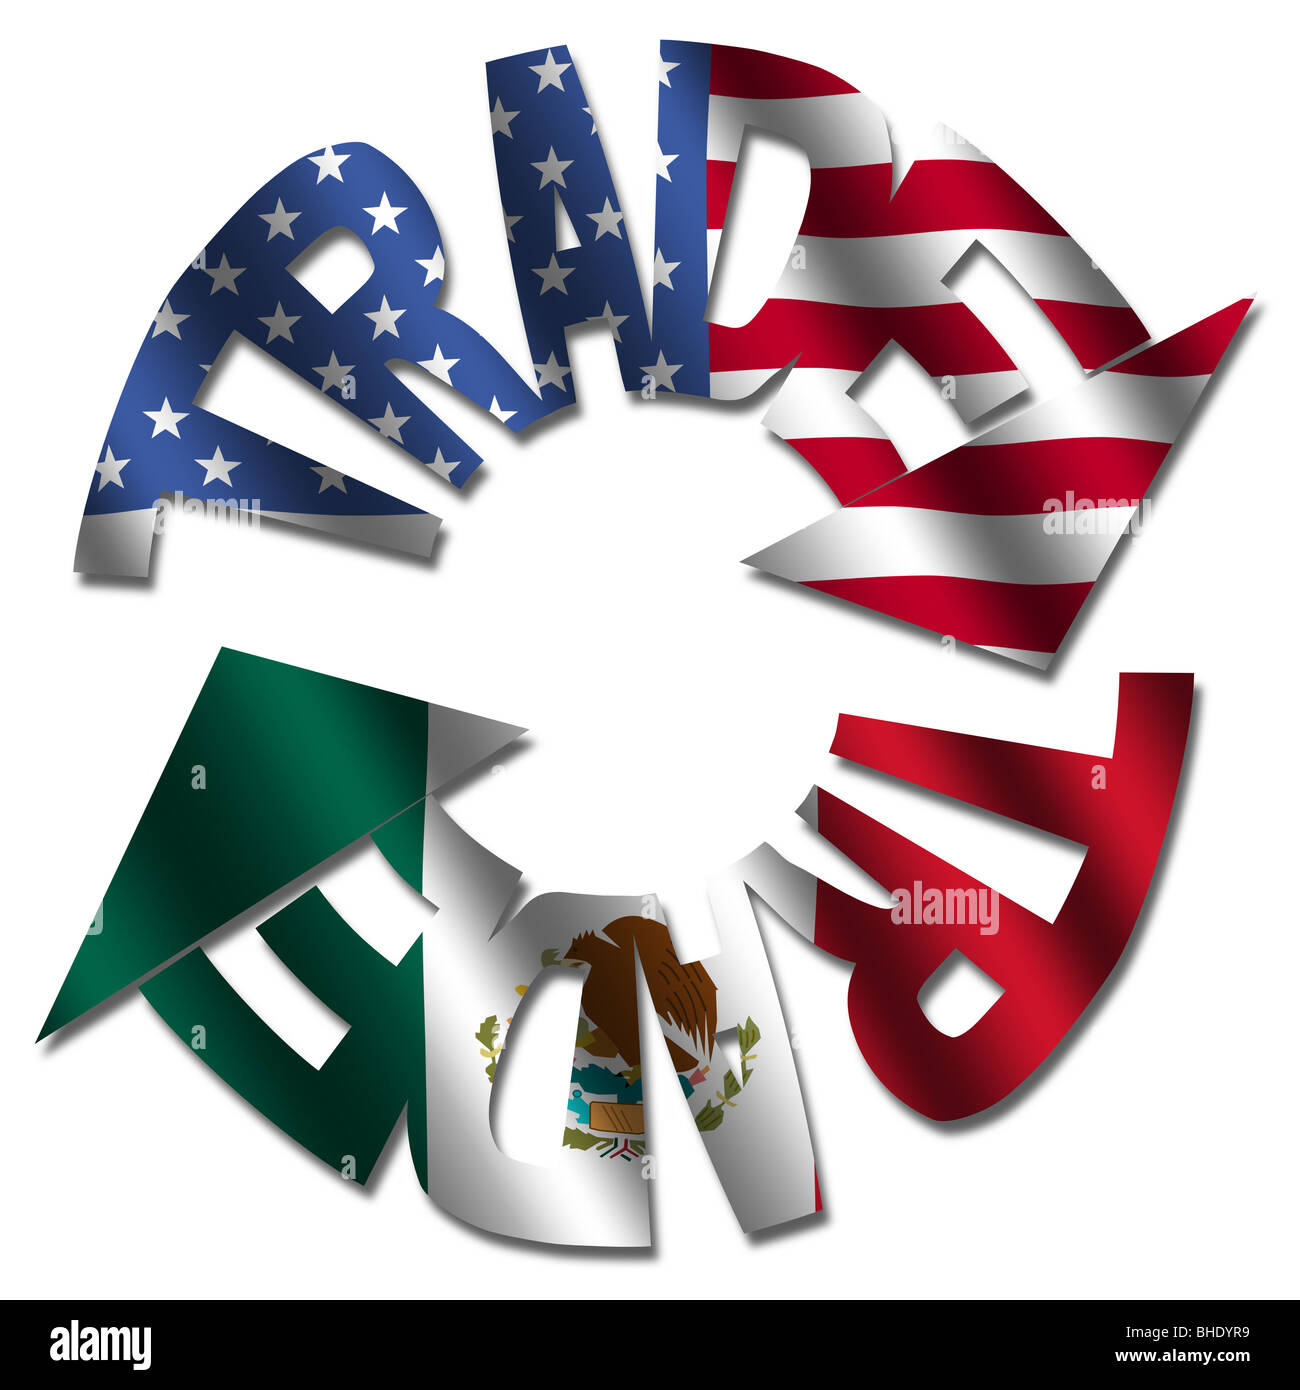 Trade text arrows with American and Mexican flags illustration Stock Photo